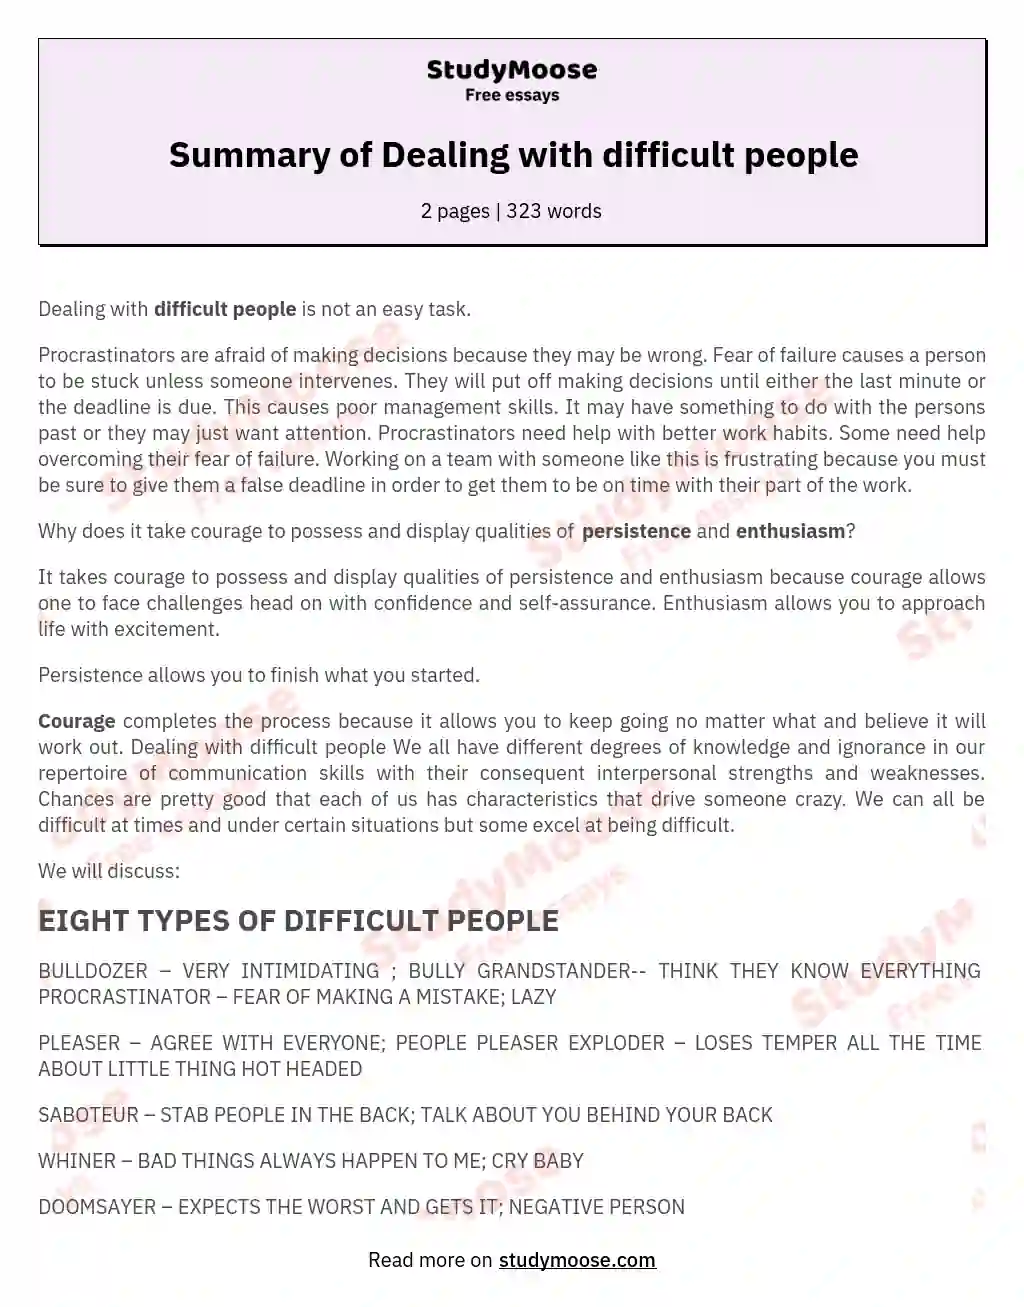 Summary of Dealing with difficult people essay